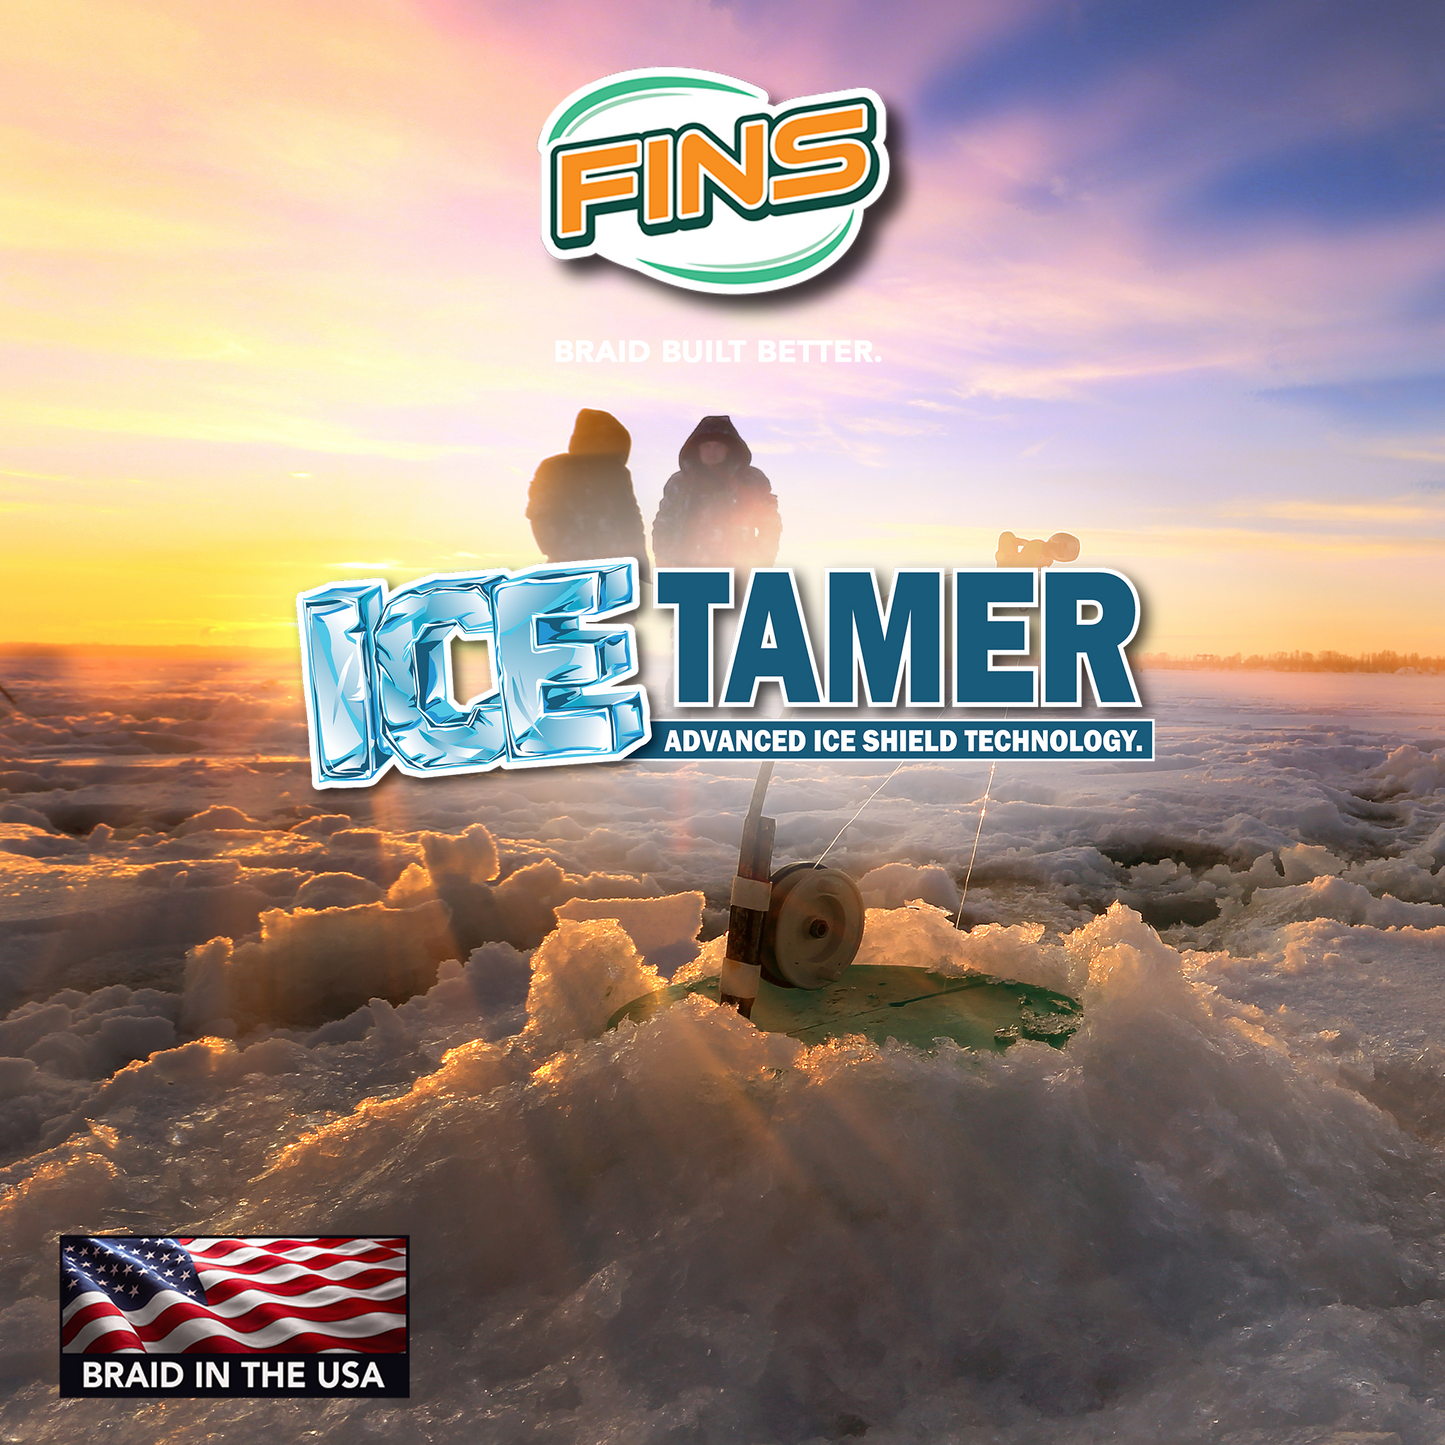 Icetamer Braid is engineered for sub-zero fishing conditions. Zero water absorption is achieved by tightly braiding while using our FINS exclusive resin-infusion process. No water absorption eliminates icing issues.